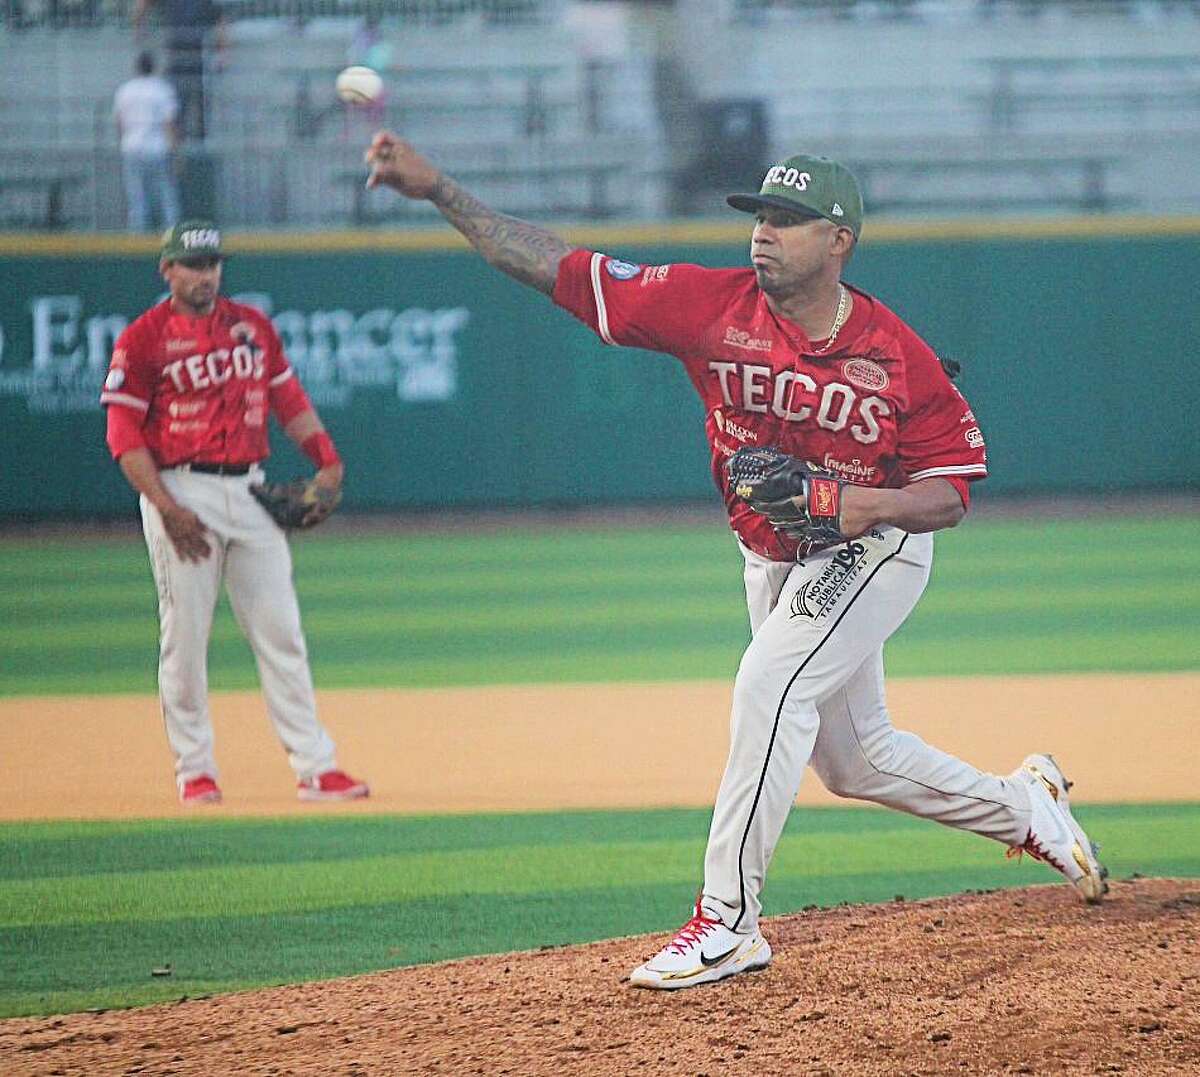 Junior Guerra struck out nine to help the Tecos to victory Wednesday night.